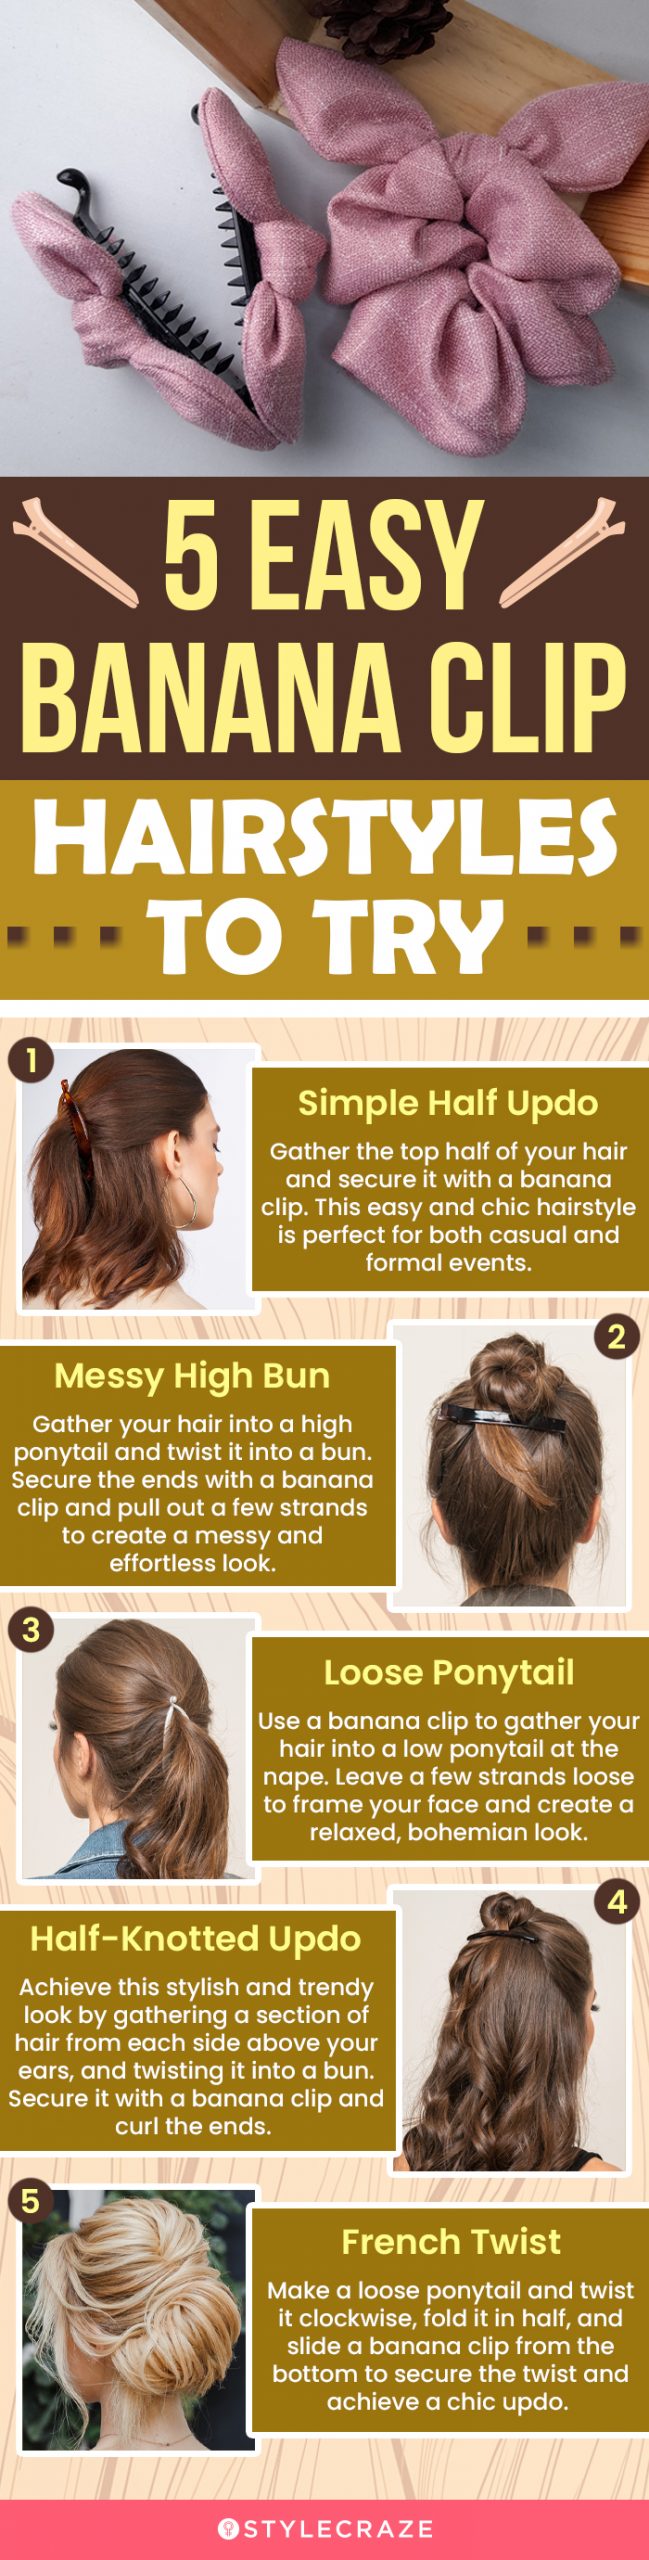 5 easy banana clip hairstyles to try (infographic)